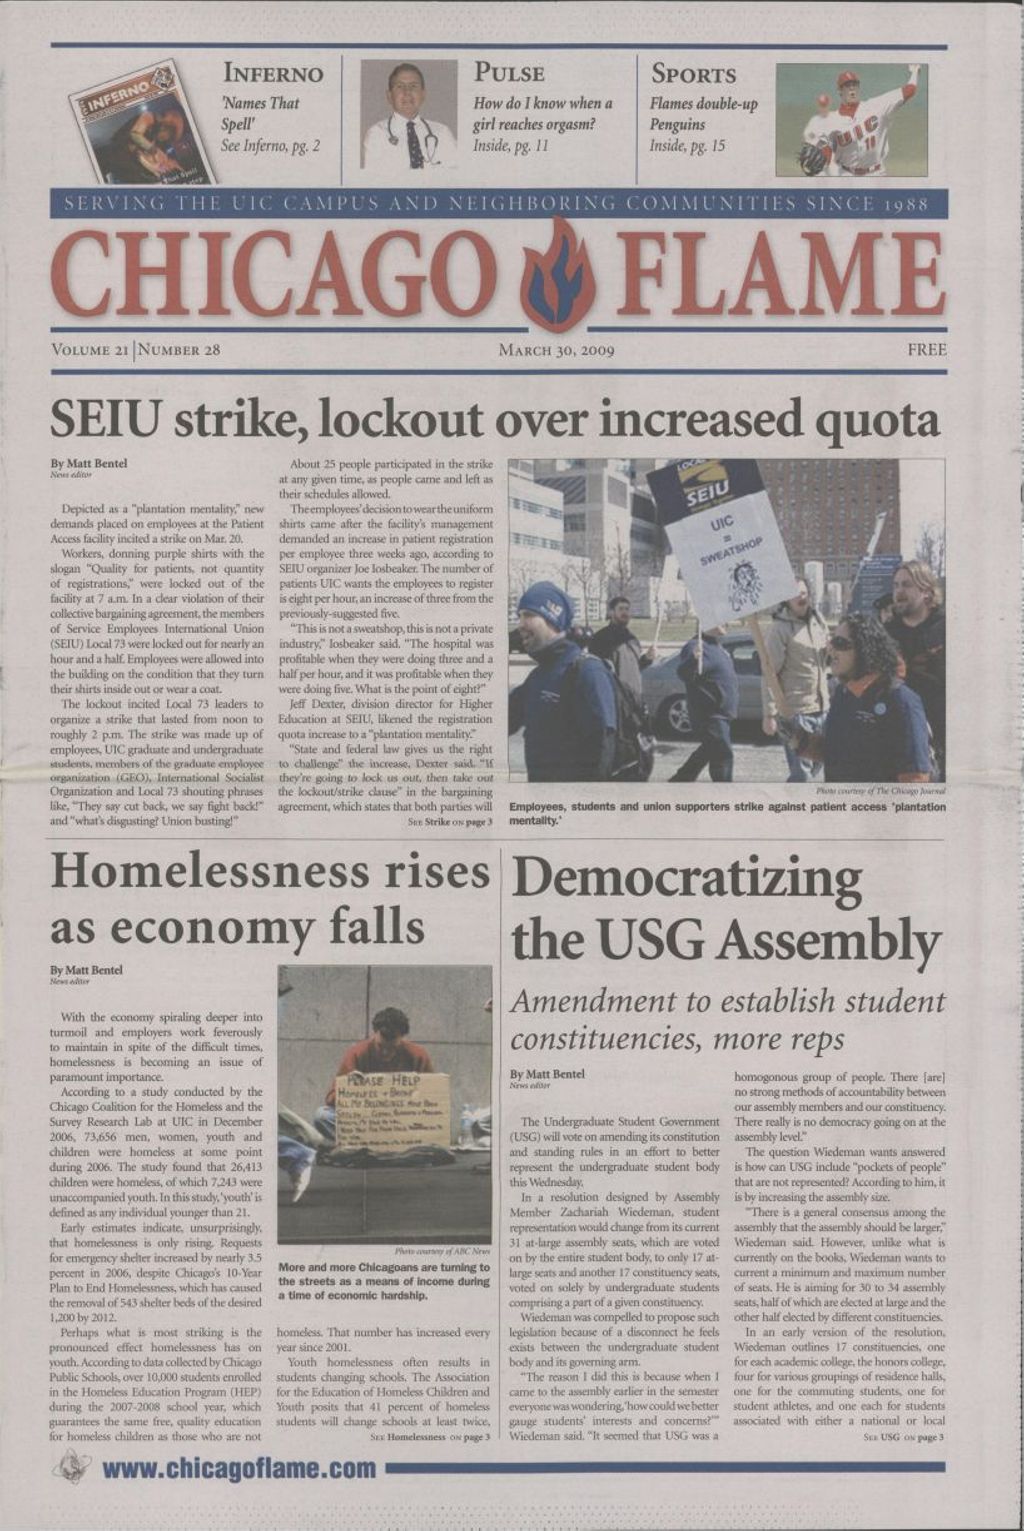 Miniature of Chicago Flame (March 30, 2009)